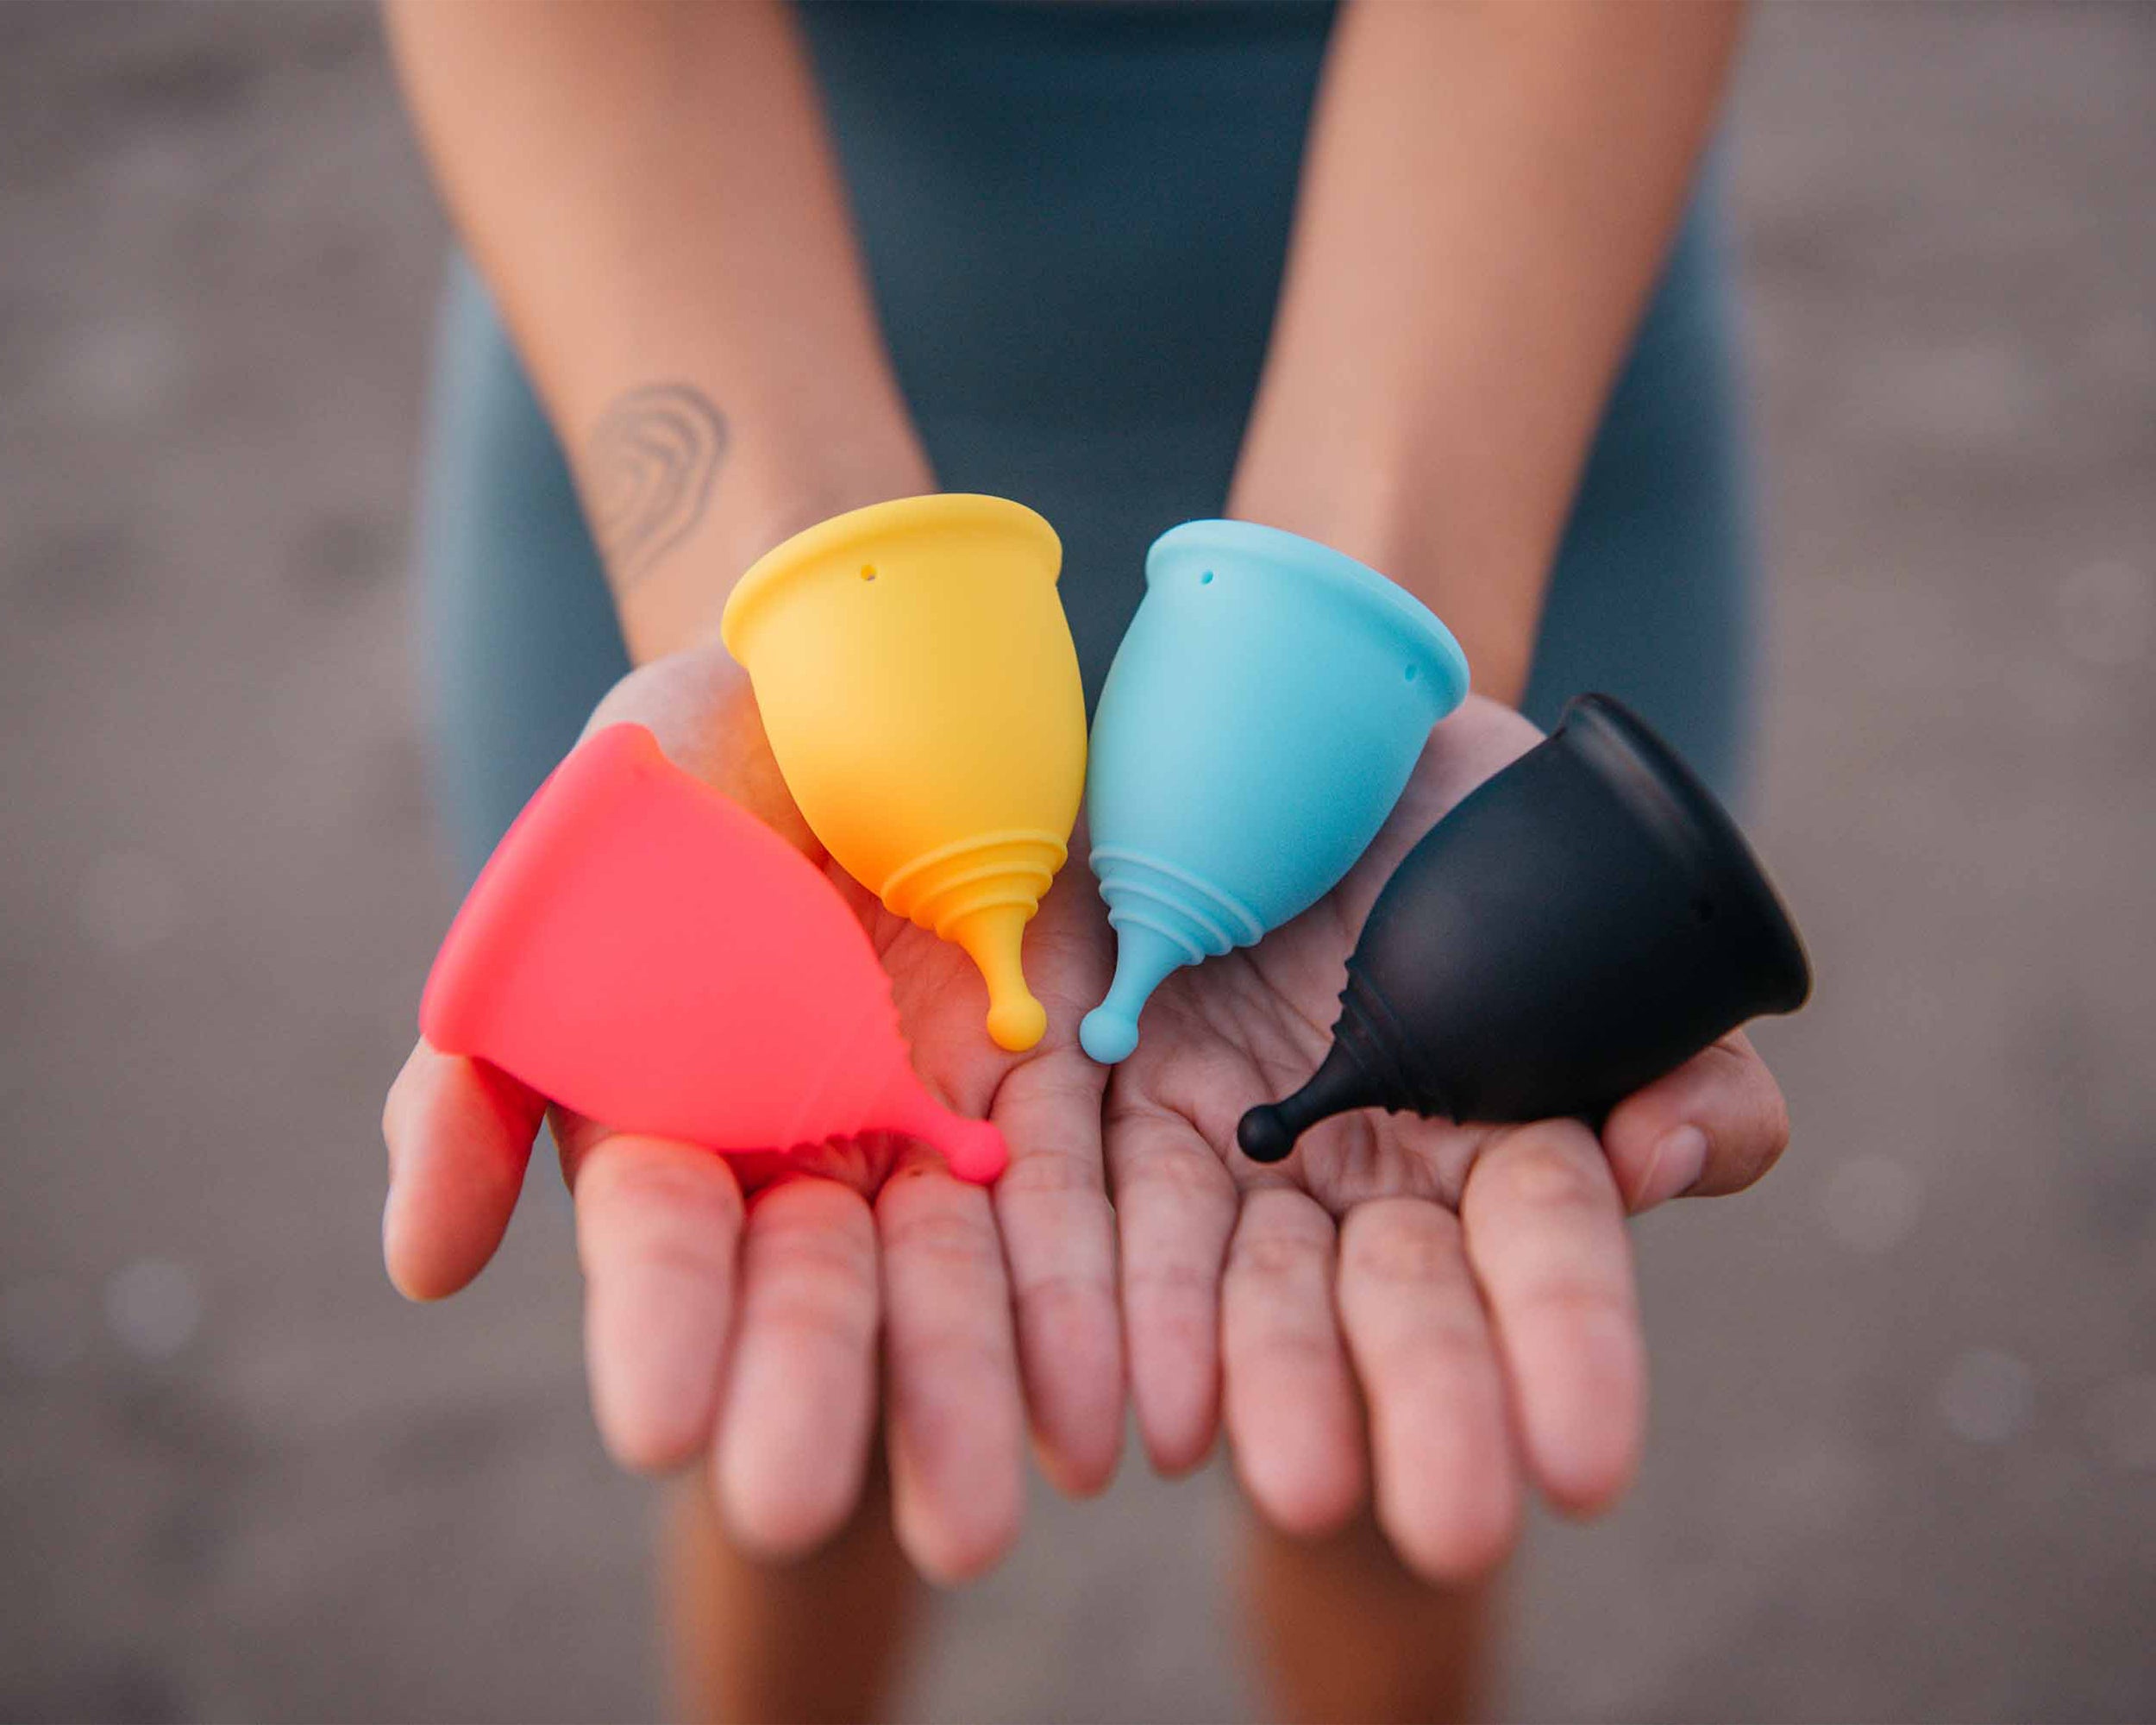 menstrual cup from bulan cup